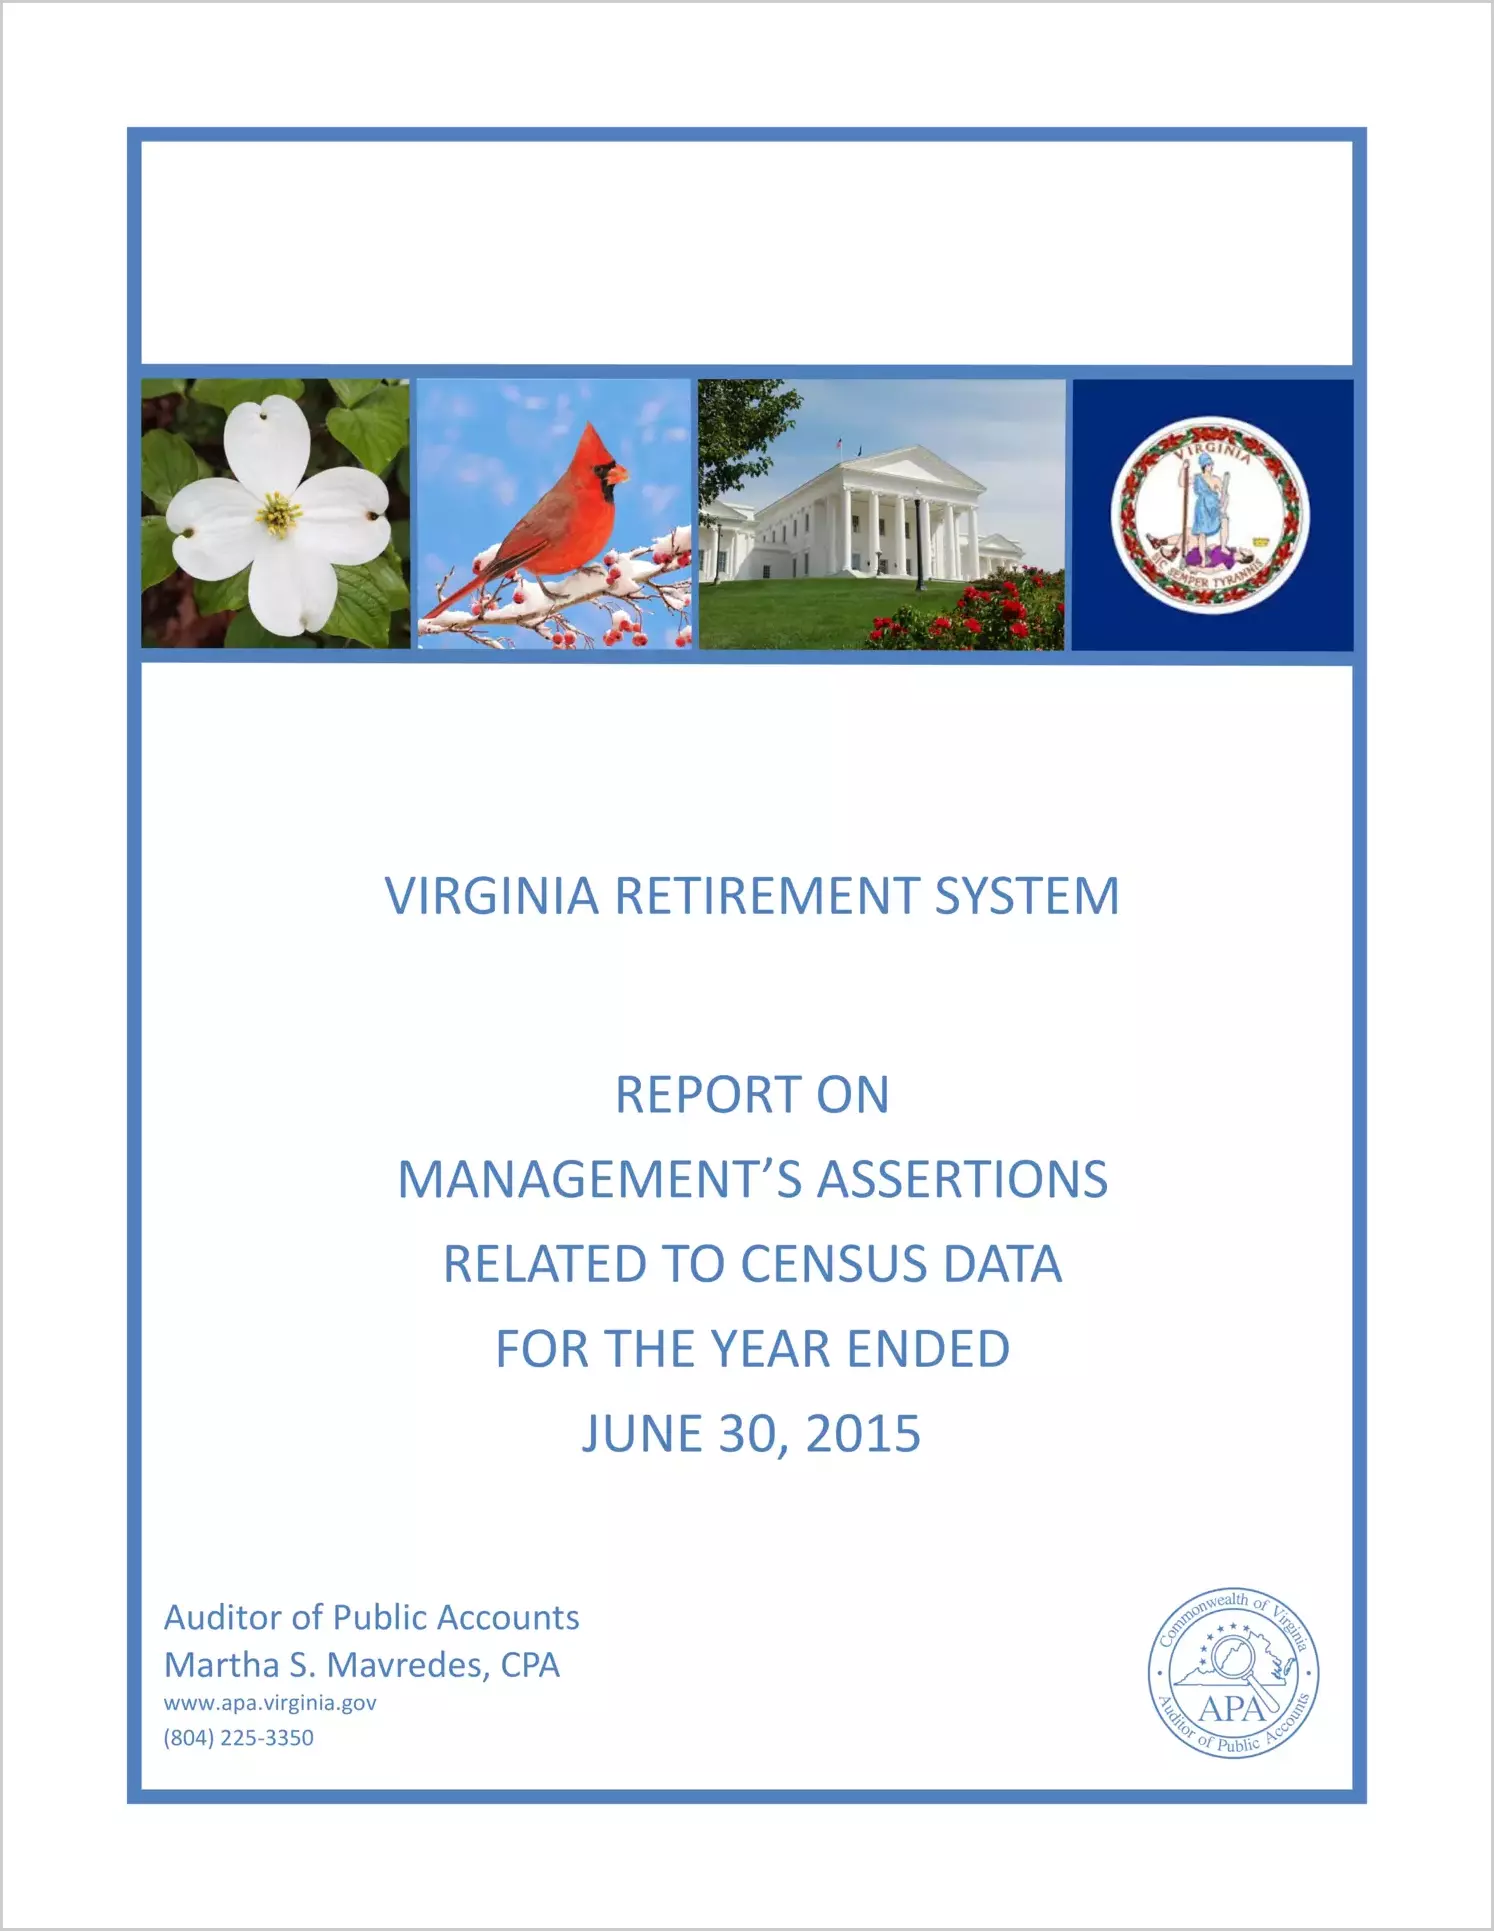 Virginia Retirement System Management's Assertions Related to Census Data for the year ended June 30, 2015